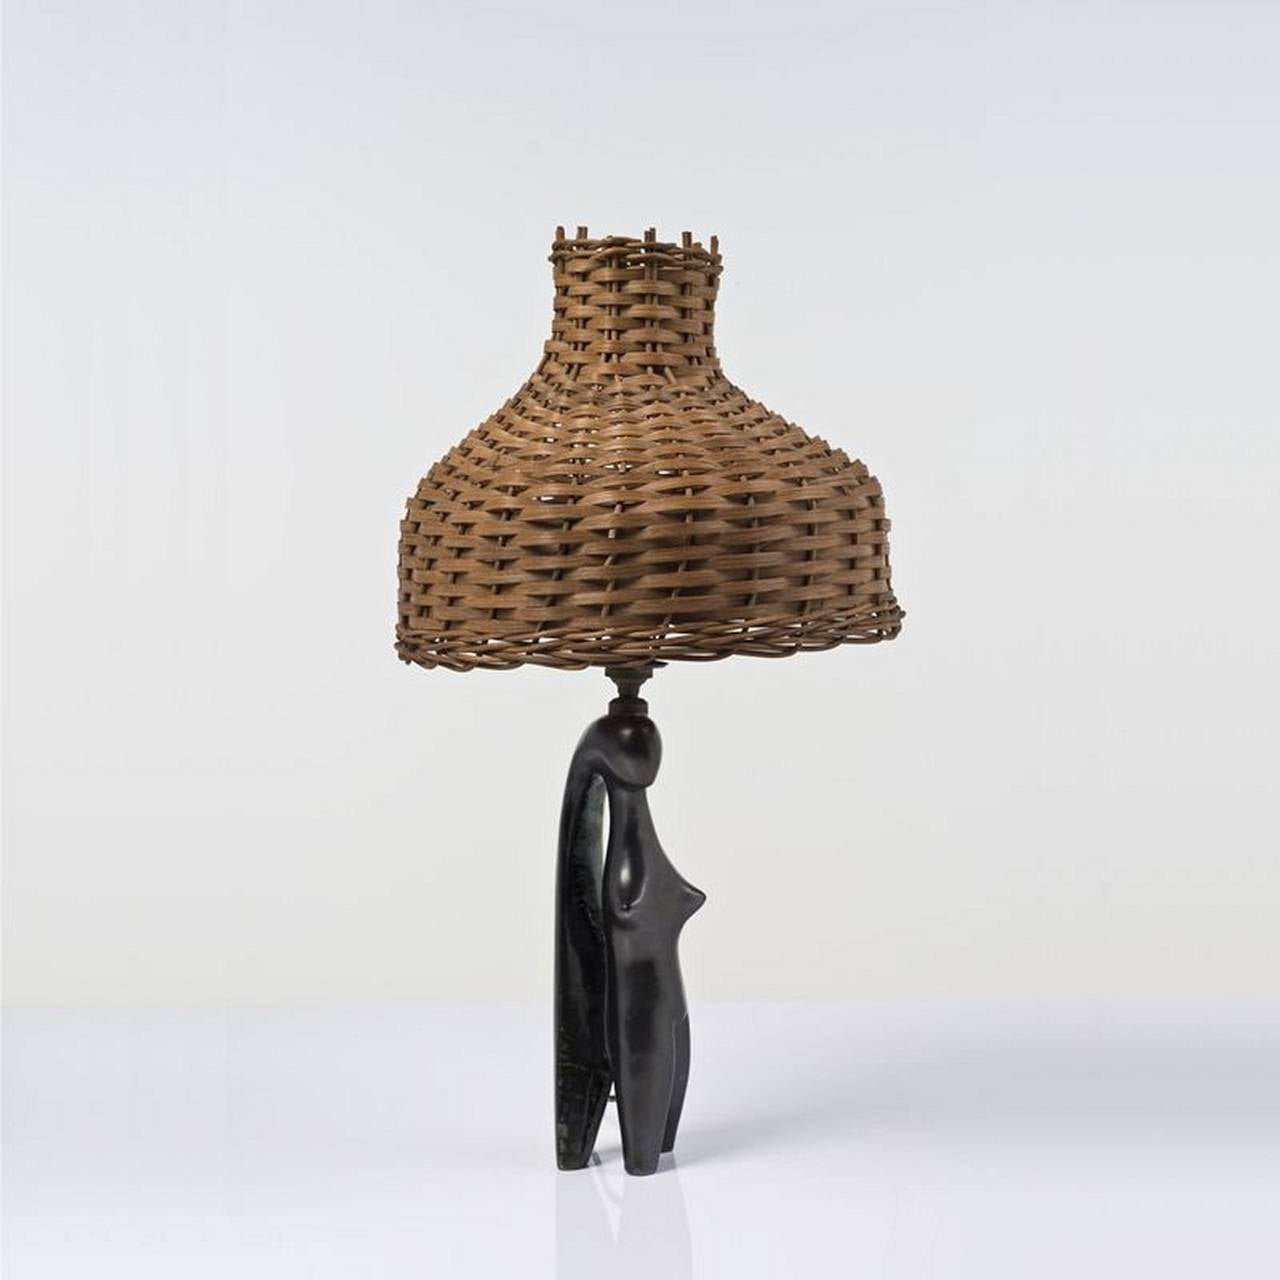 Black enameled ceramic table lamp in female form by Jacques Blin (1920-1955). France circa 1960s. H 58cmx 33cm.